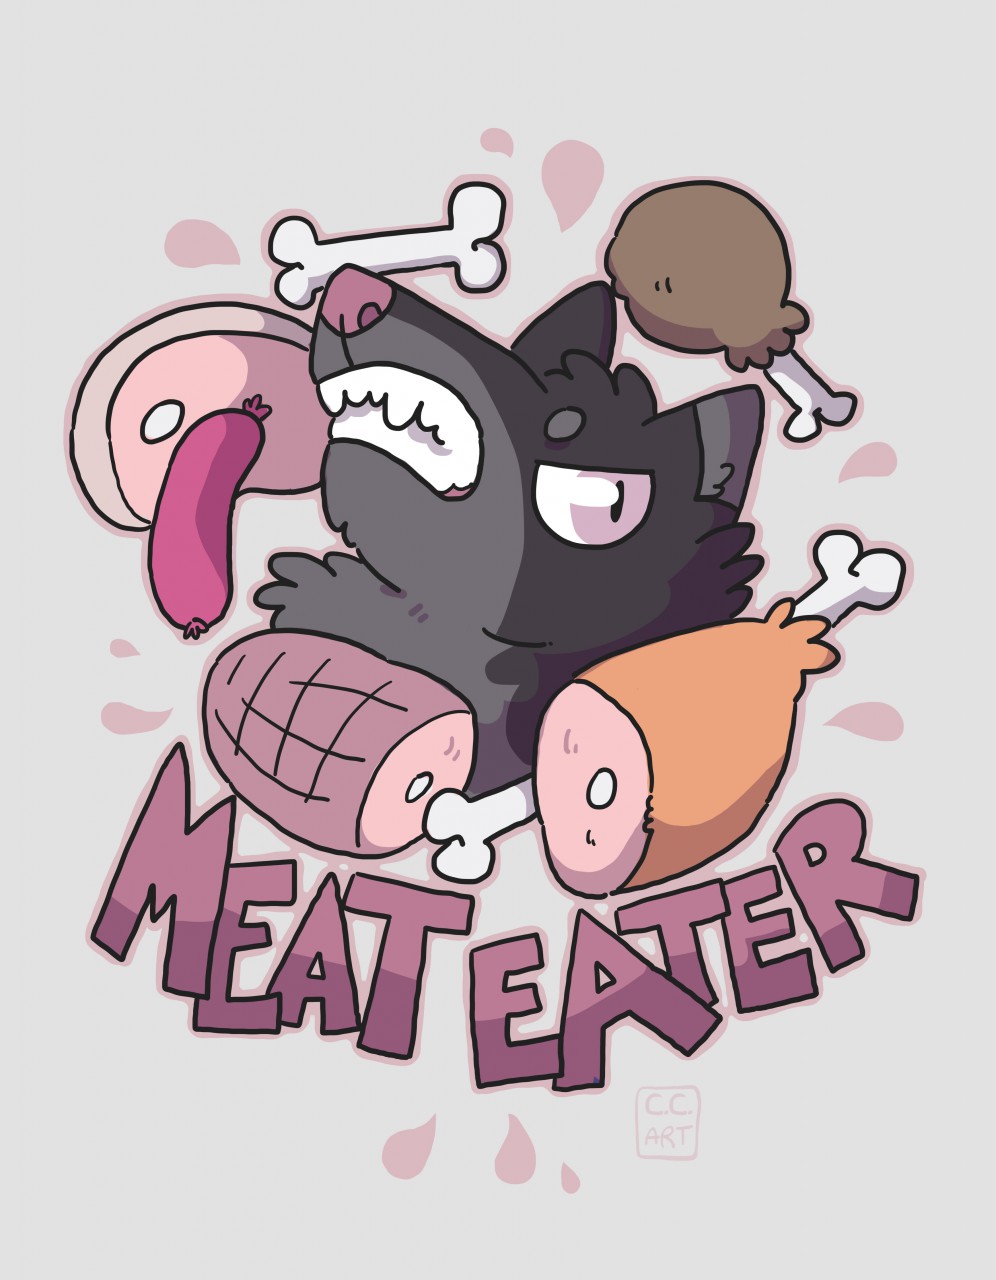 meat eater.